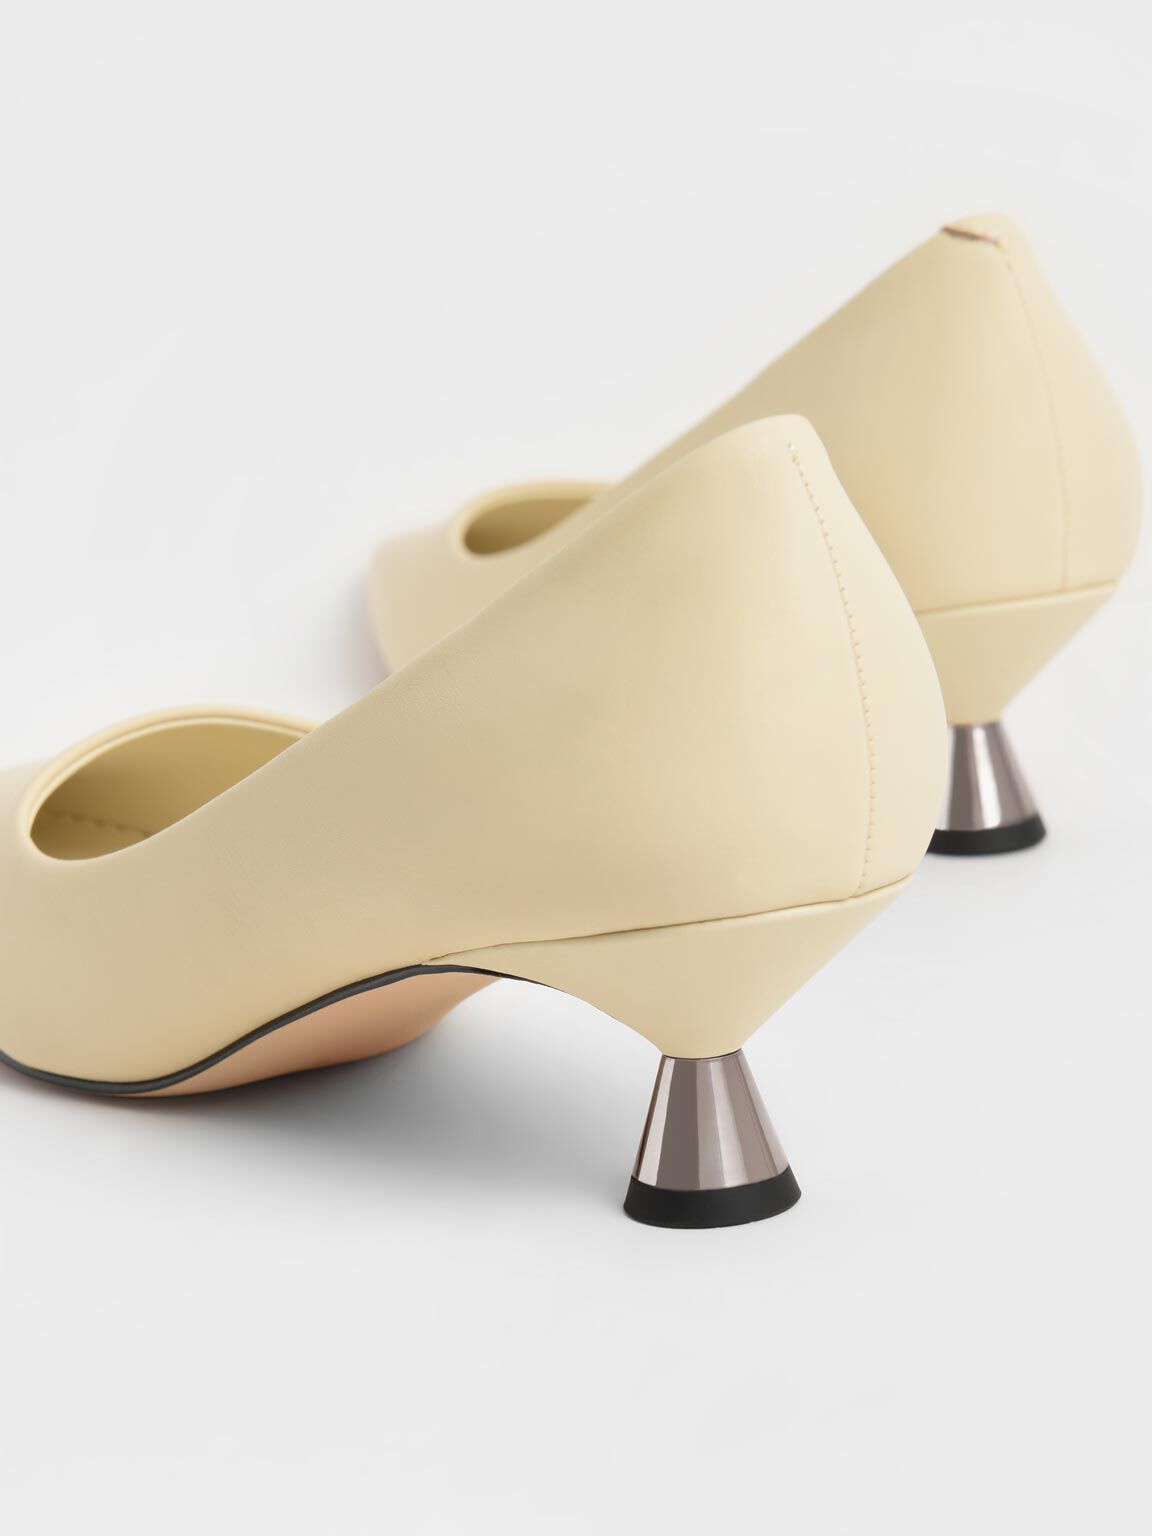 Pump made of ivory white suede, high cut shaft edge and high heel, Women's  shoe made of ivory white suede. Model: Pointed nose, one-piece leather top.  The front of the heel runs